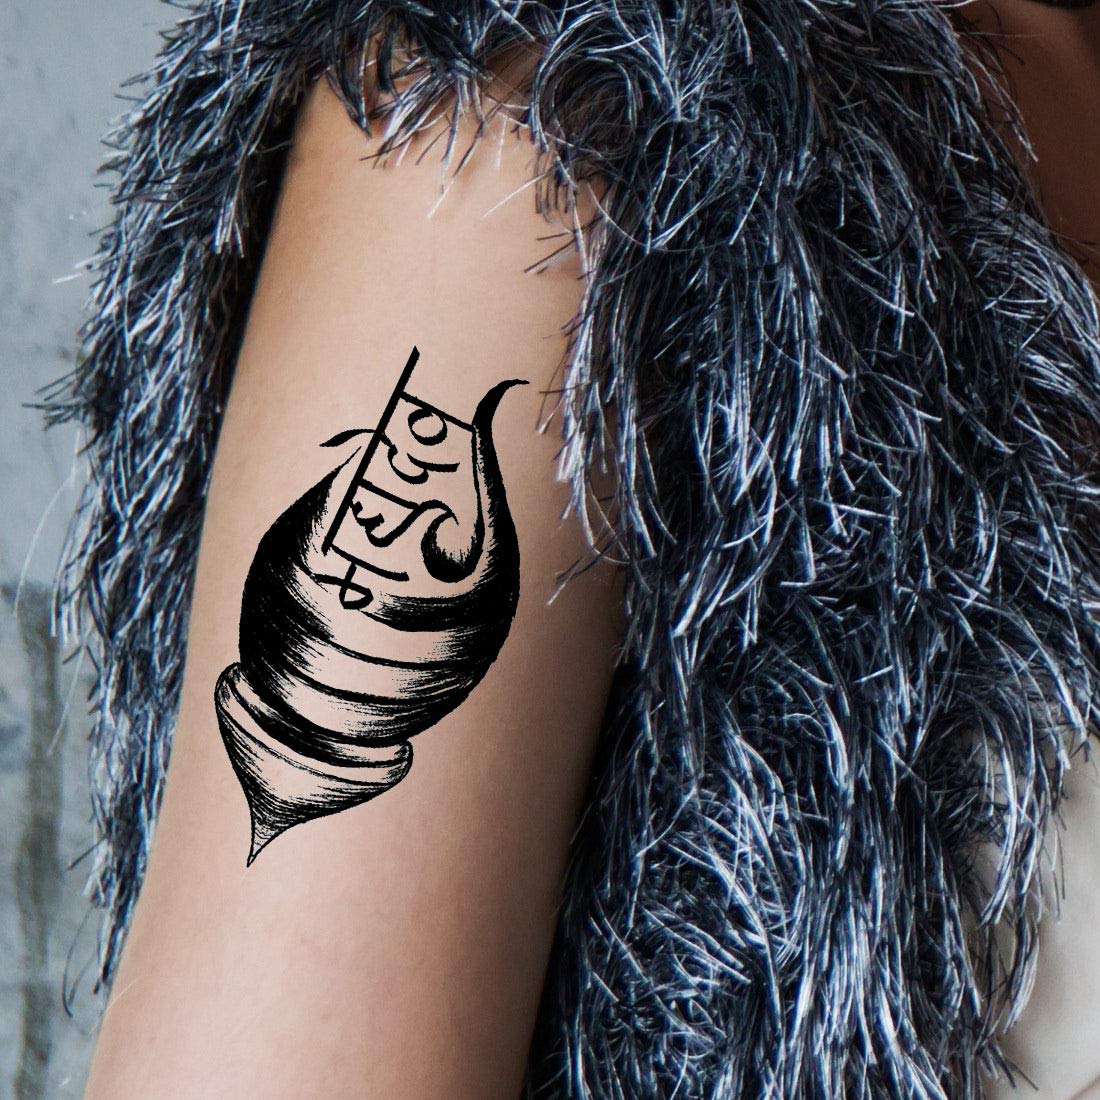 What is the symbolism and meaning in this Lord Shiva tattoo? : r/hinduism